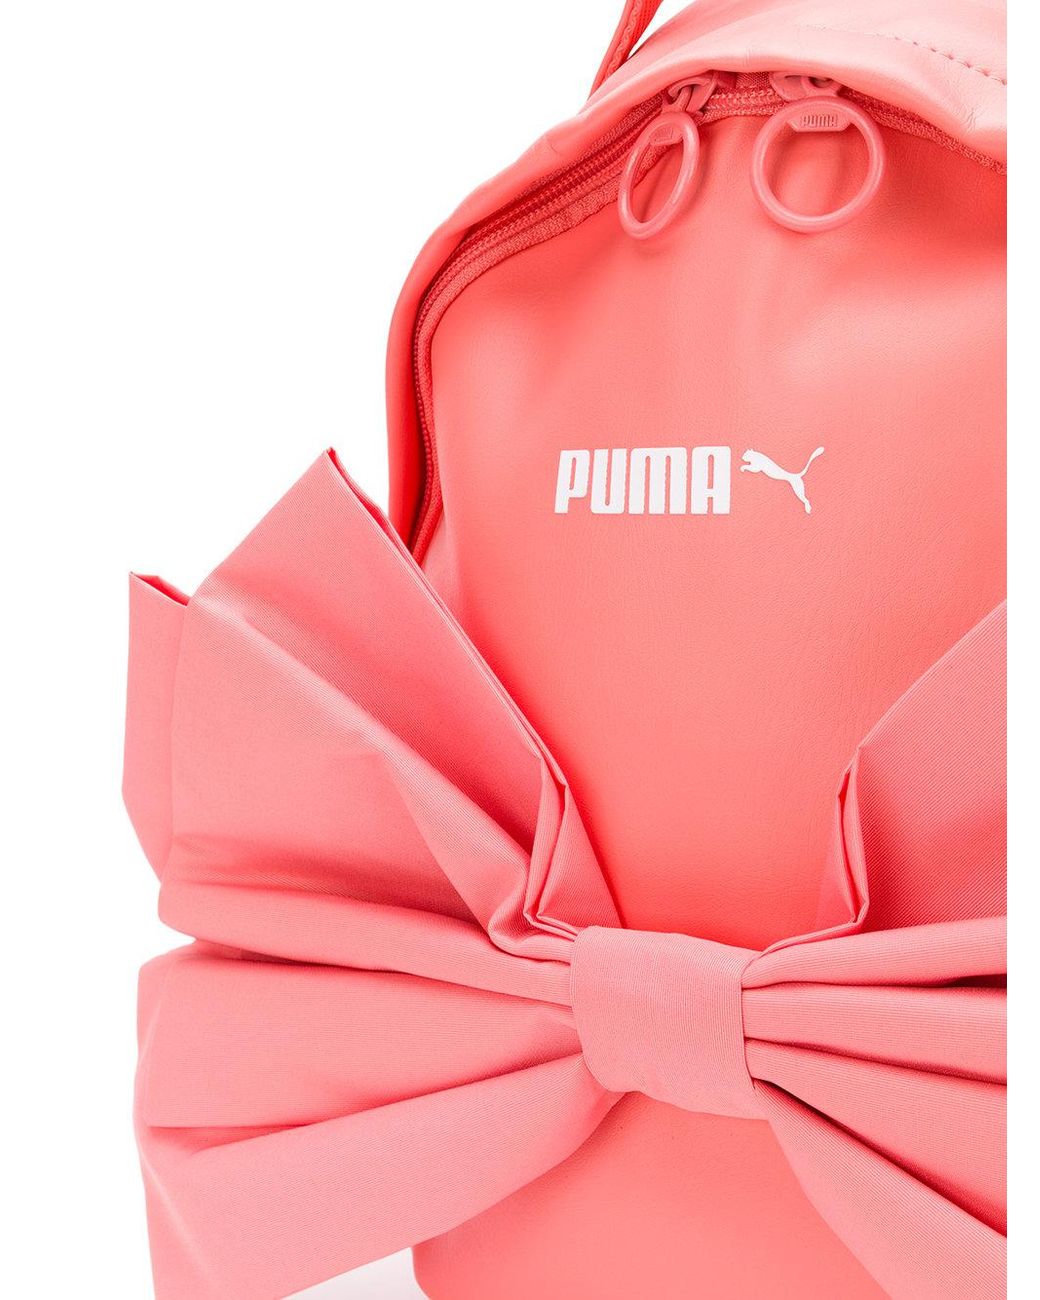 PUMA Bow Backpack in Pink | Lyst UK